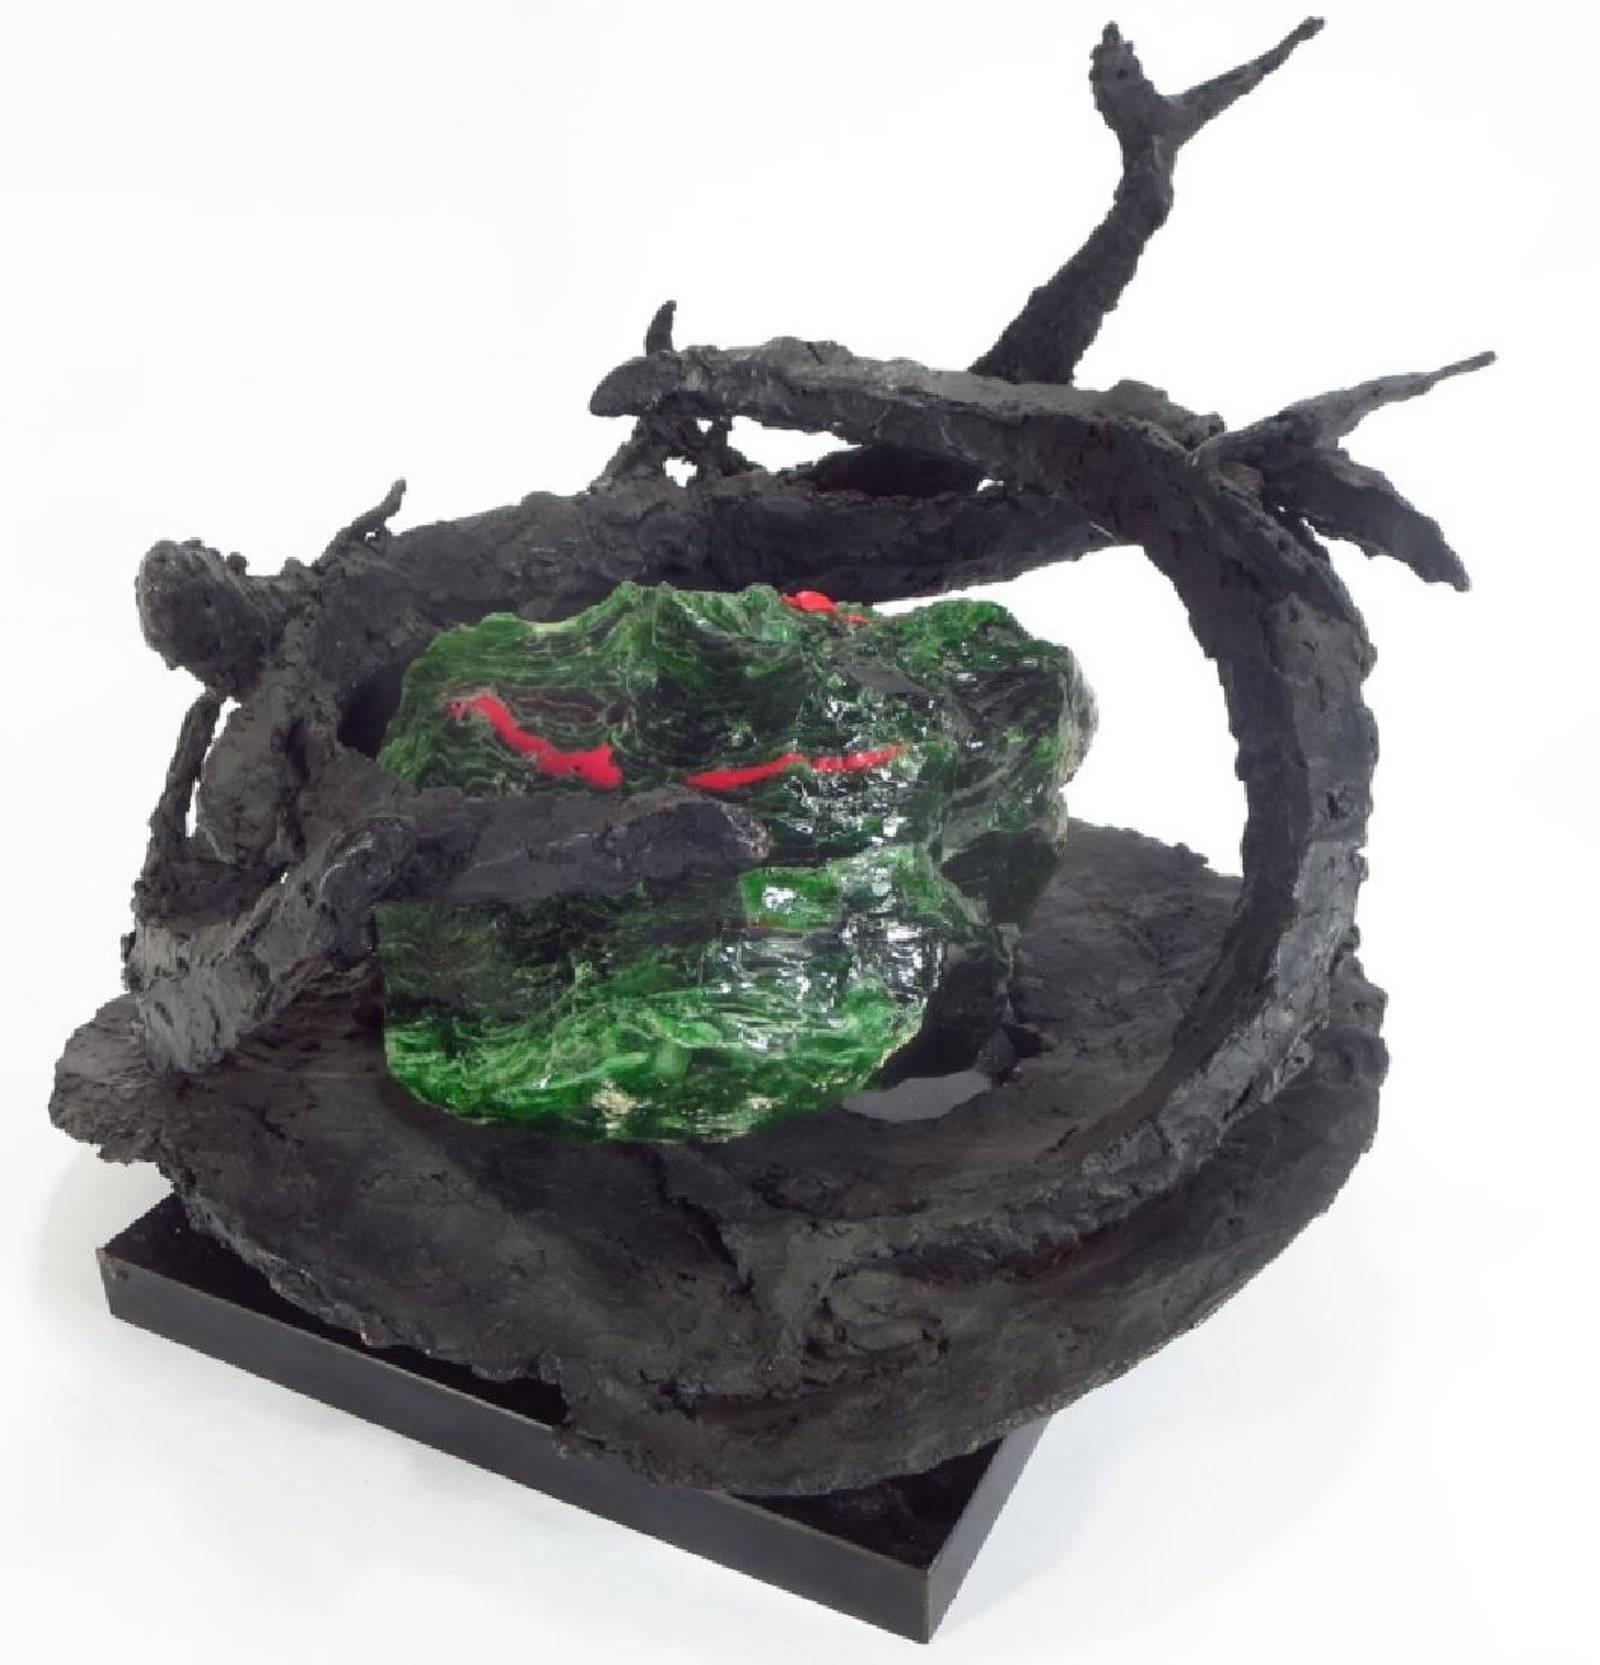 Margaret Reventlow, American born London, 1915 - 2014, "Ten Fathoms Deep", (swimming fish) bronze with green and red slag glass, unsigned, with artist name, title, etc on a label on its swivel base. 
Provenance: From the Estate of Countess Margaret